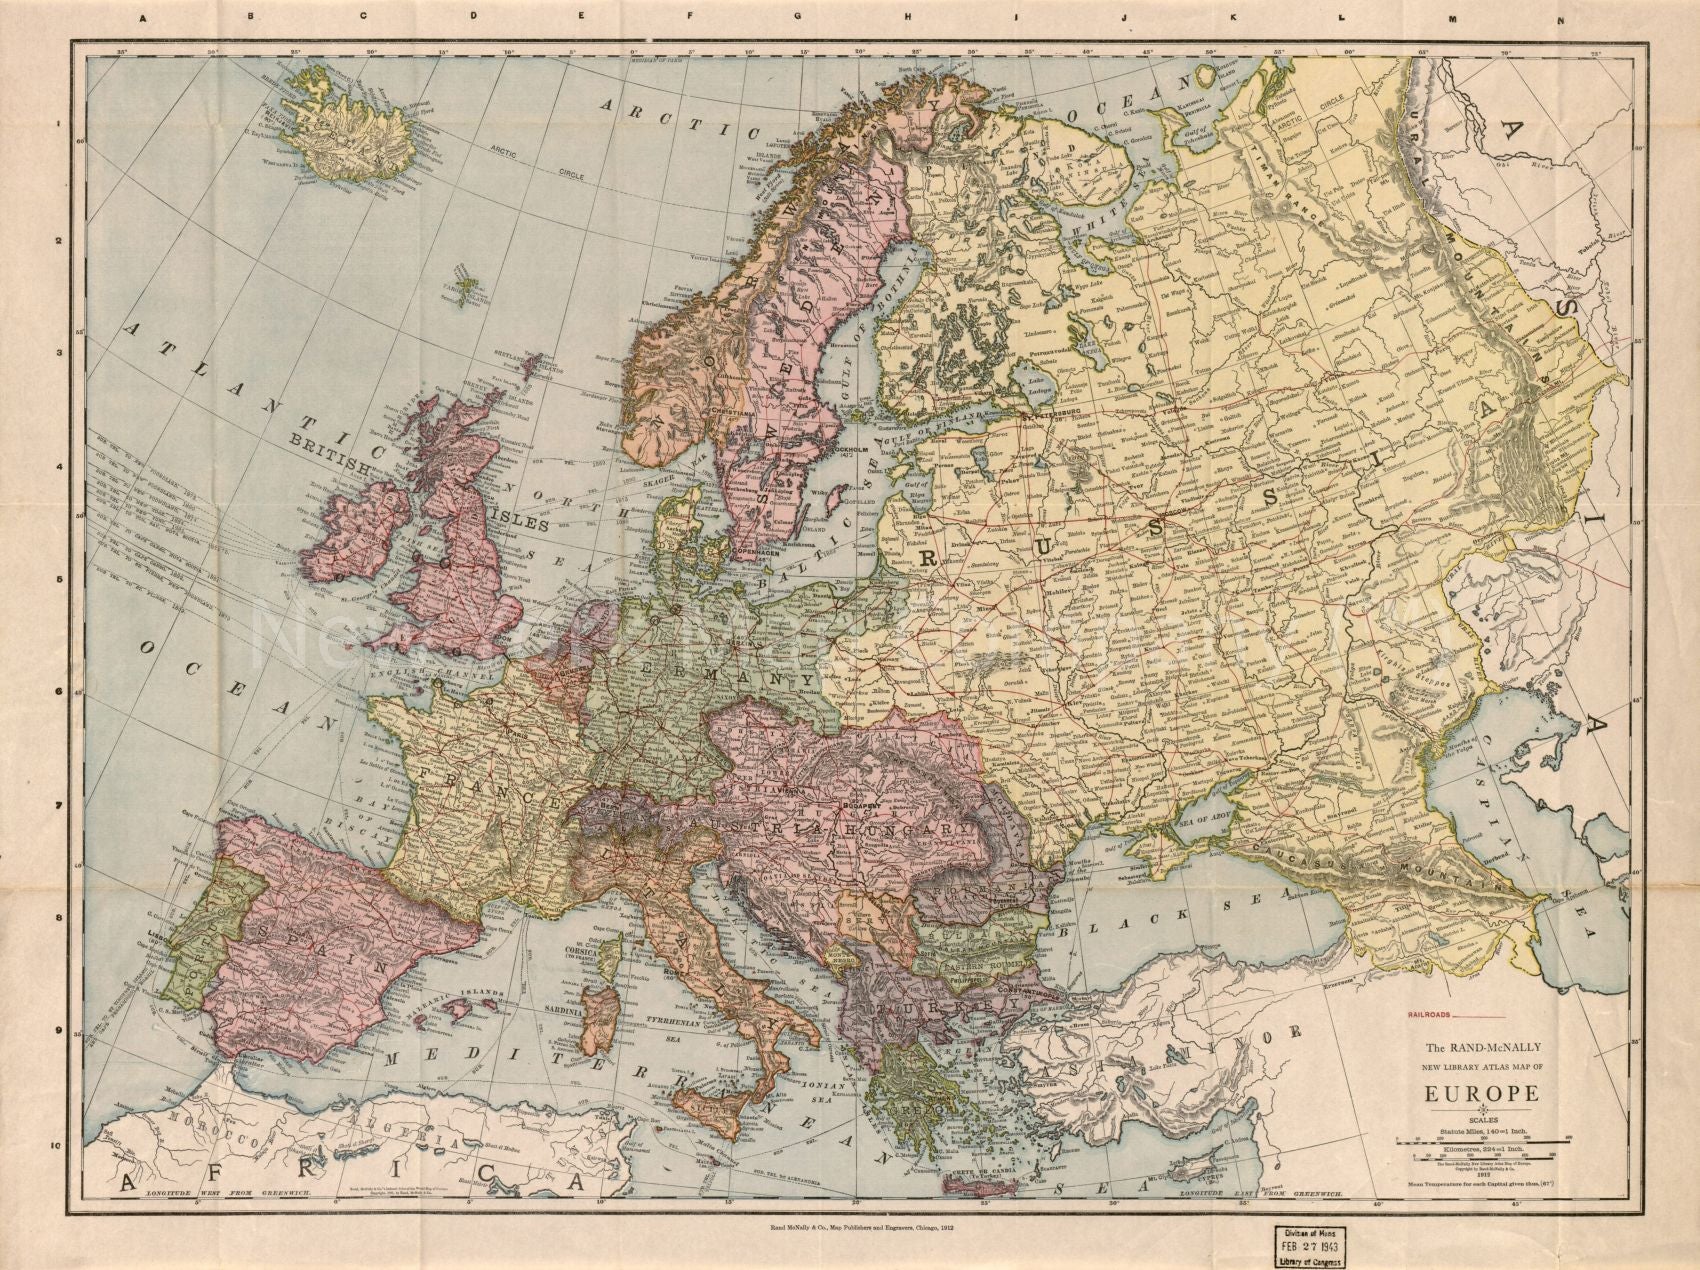 1912 map The Rand-McNally new library atlas map of Europe. Map Subjects: Europe